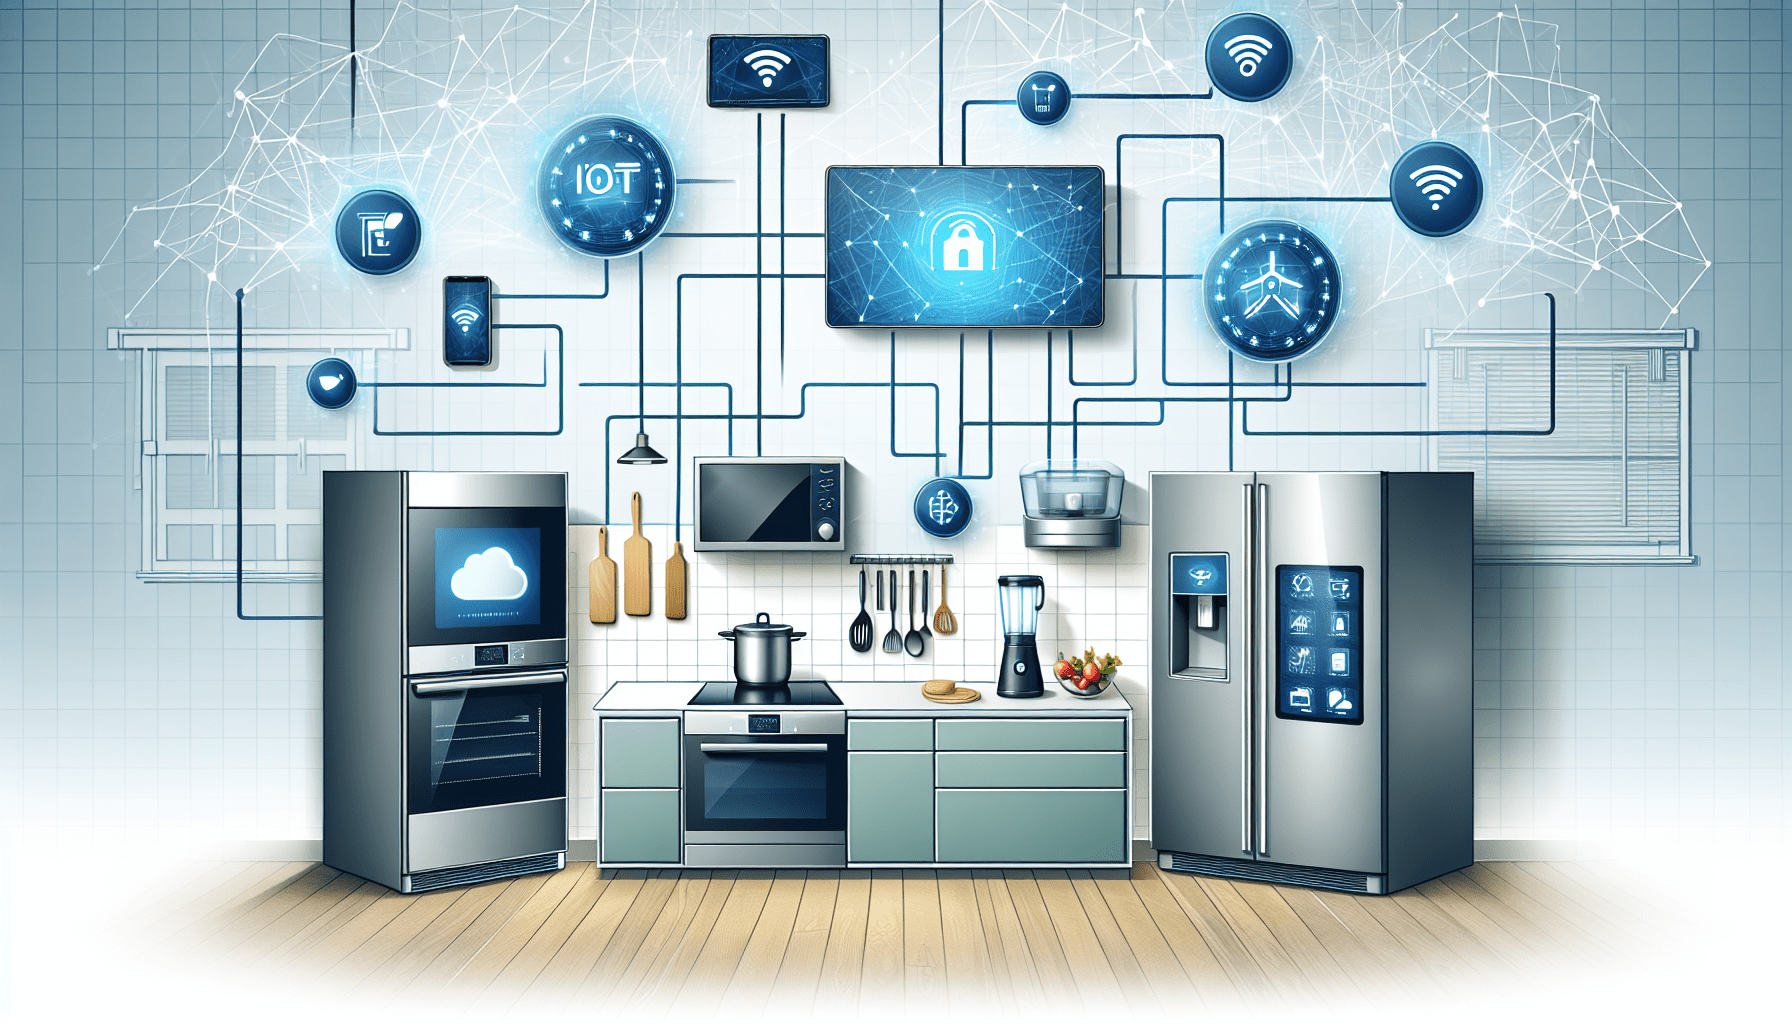 What Are The Disadvantages Of Smart Appliances?